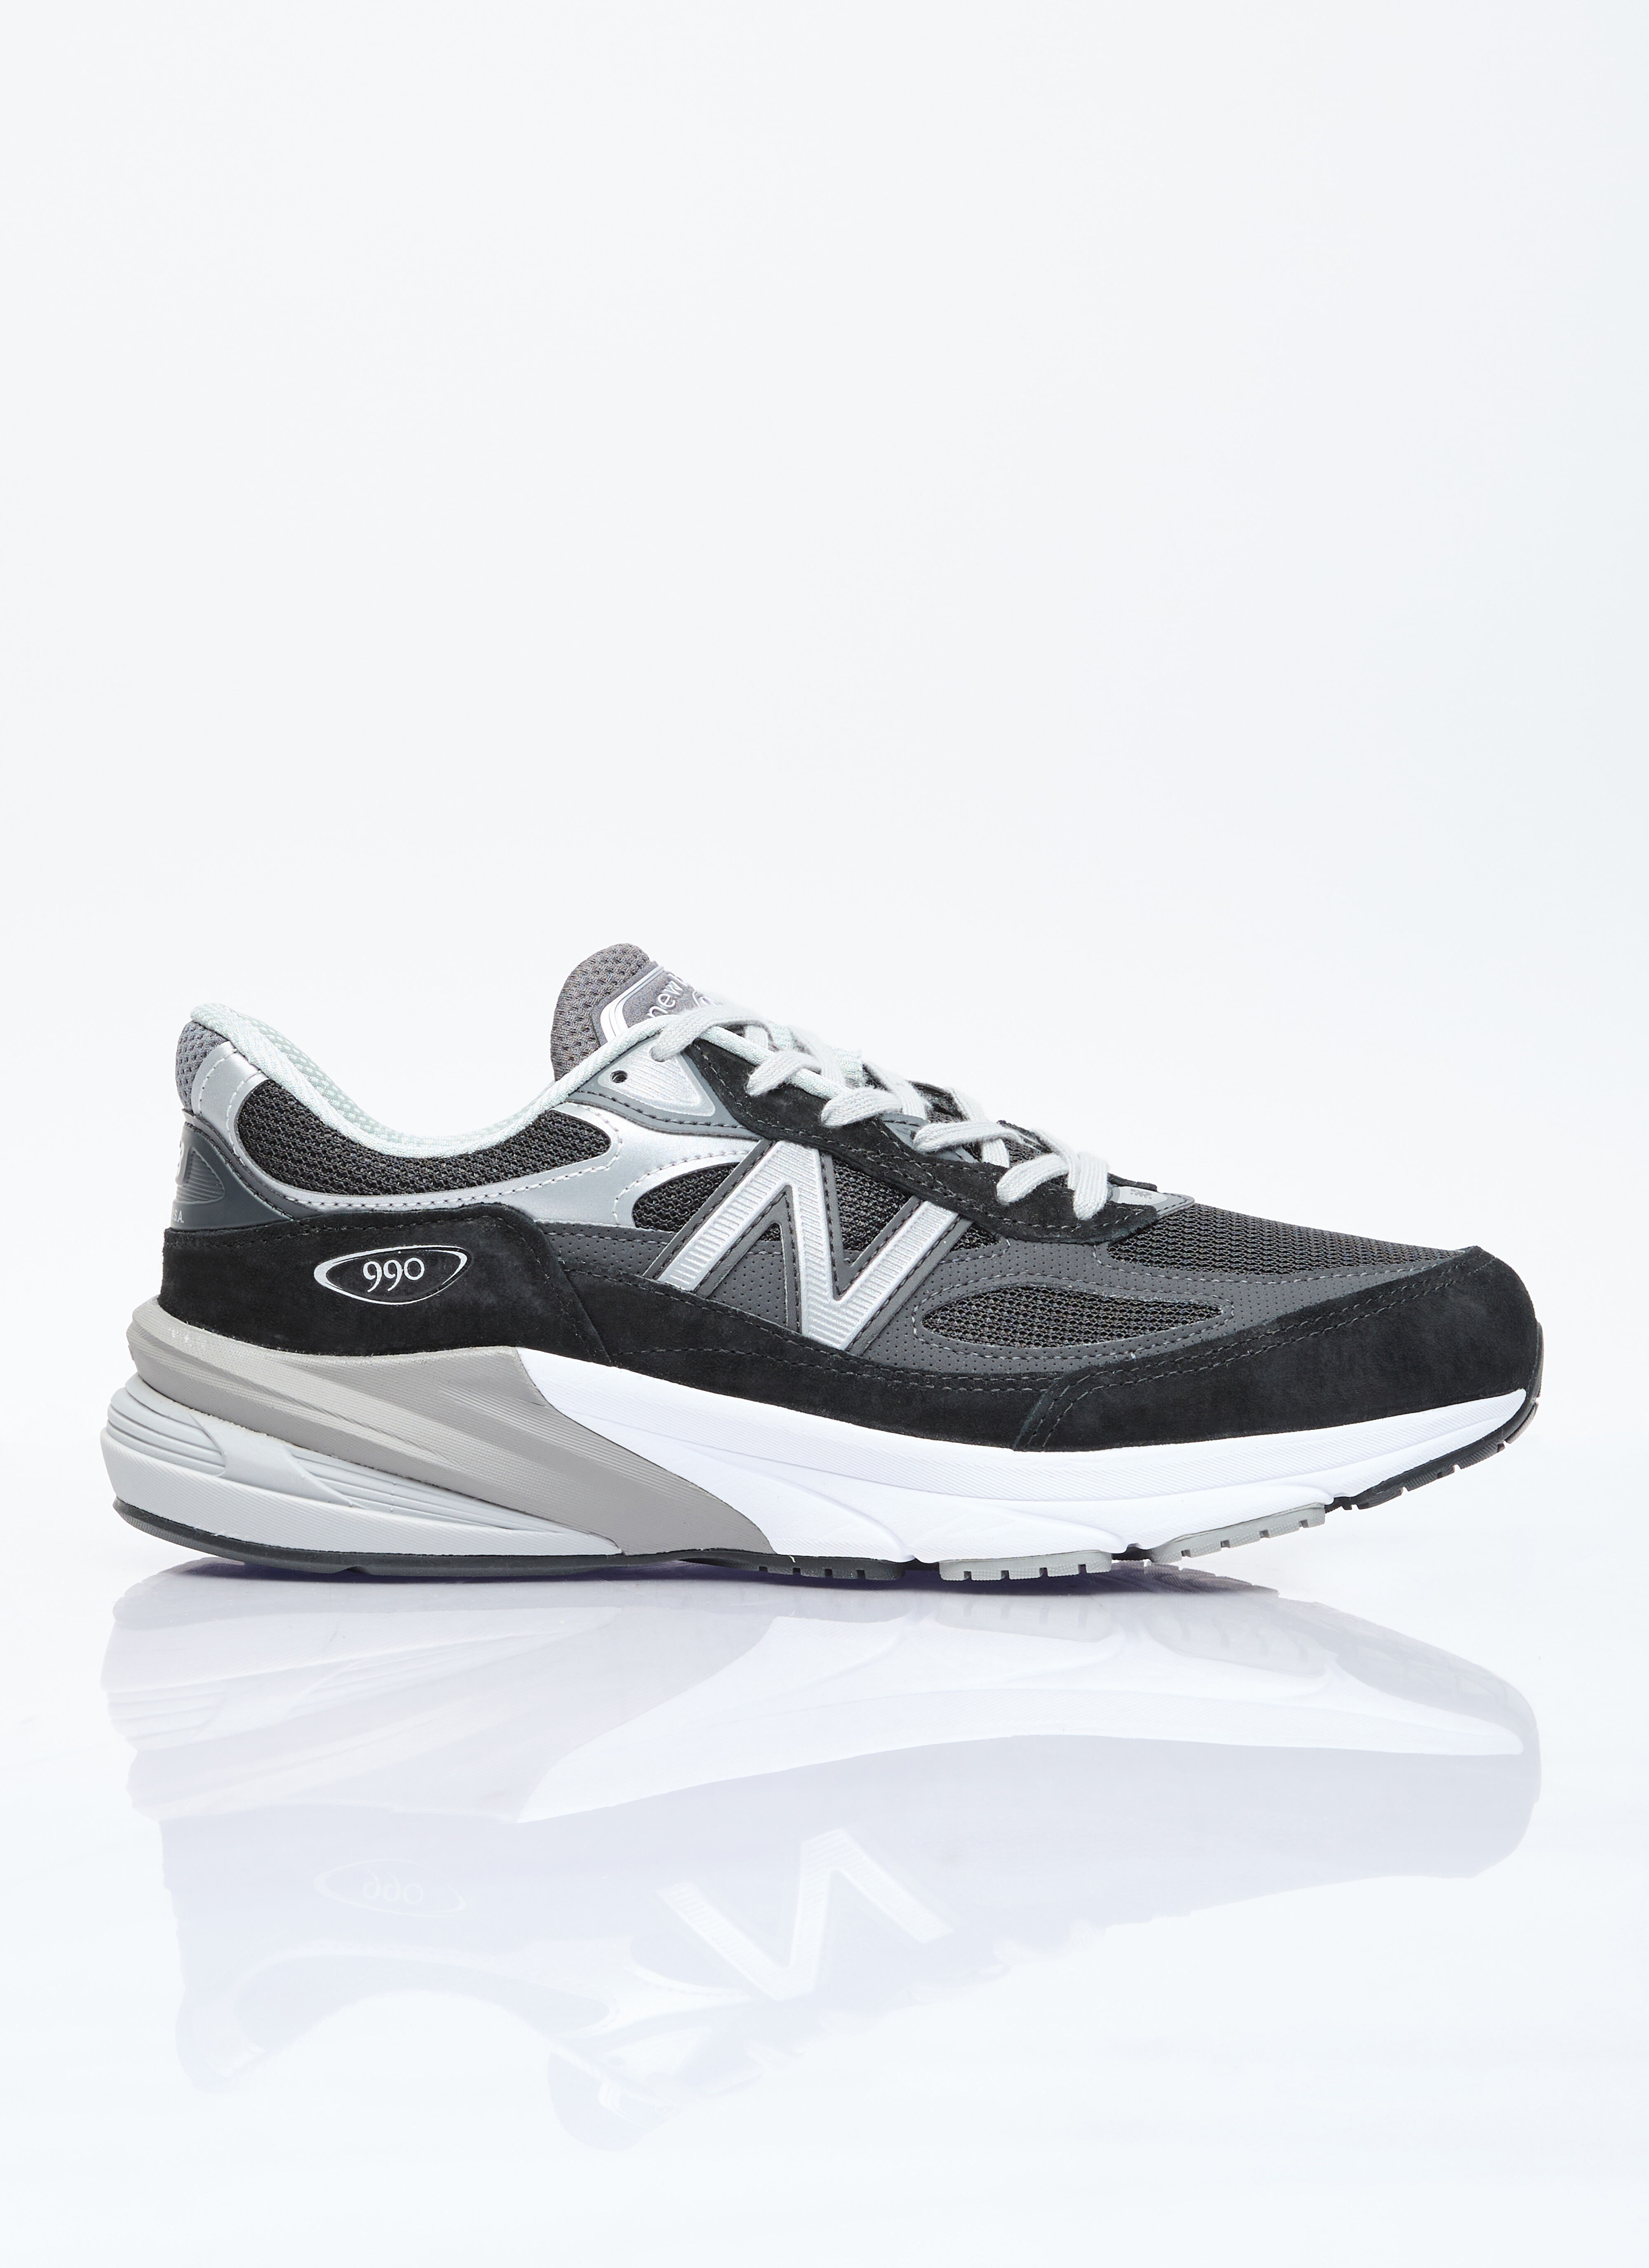 New Balance 990 Sneakers White new0156006